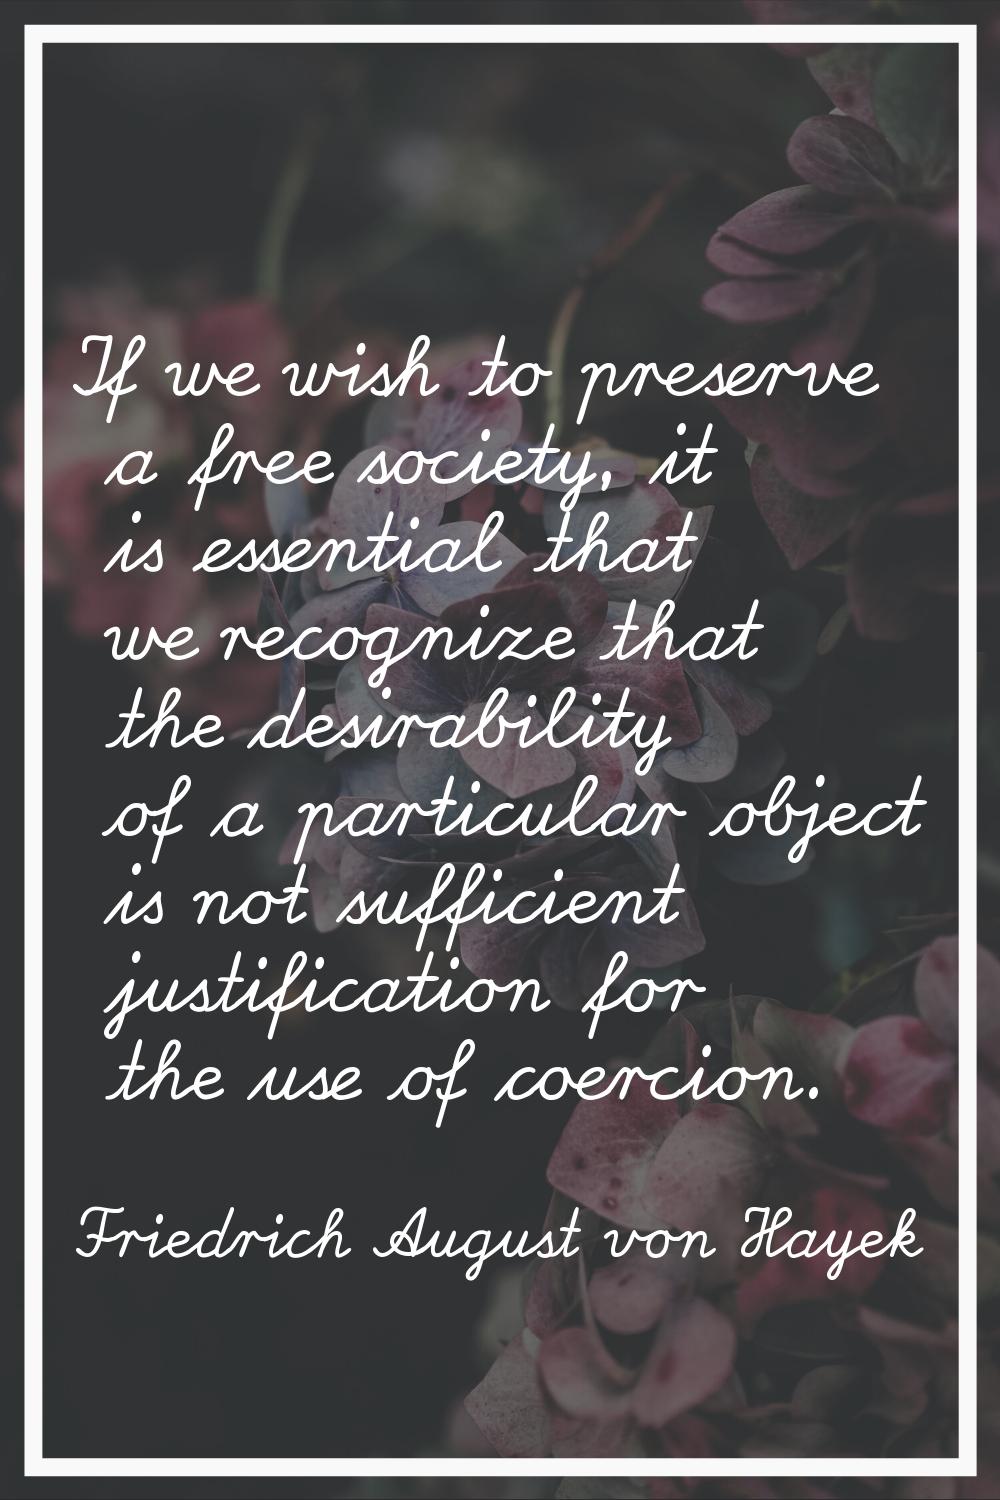 If we wish to preserve a free society, it is essential that we recognize that the desirability of a